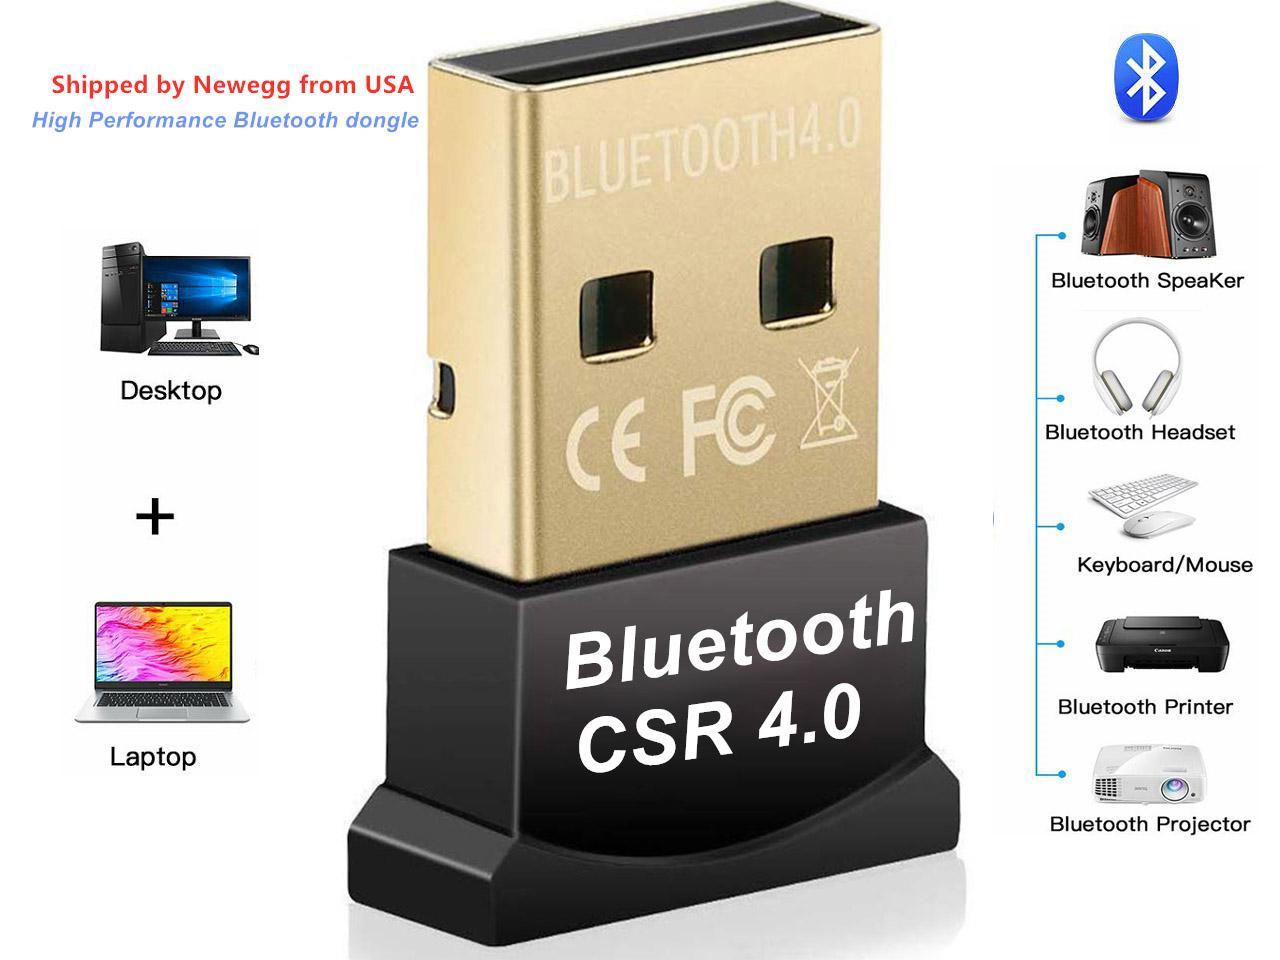 High Performance Bluetooth 4.0 Adapter, Wireless Bluetooth CSR 4.0 Adapter Compatible with Windows 10, 8.1 / 8, 7, Vista, XP, Bit and Classic Bluetooth, Stereo Headset Compatible Bluetooth Adapters - Newegg.com